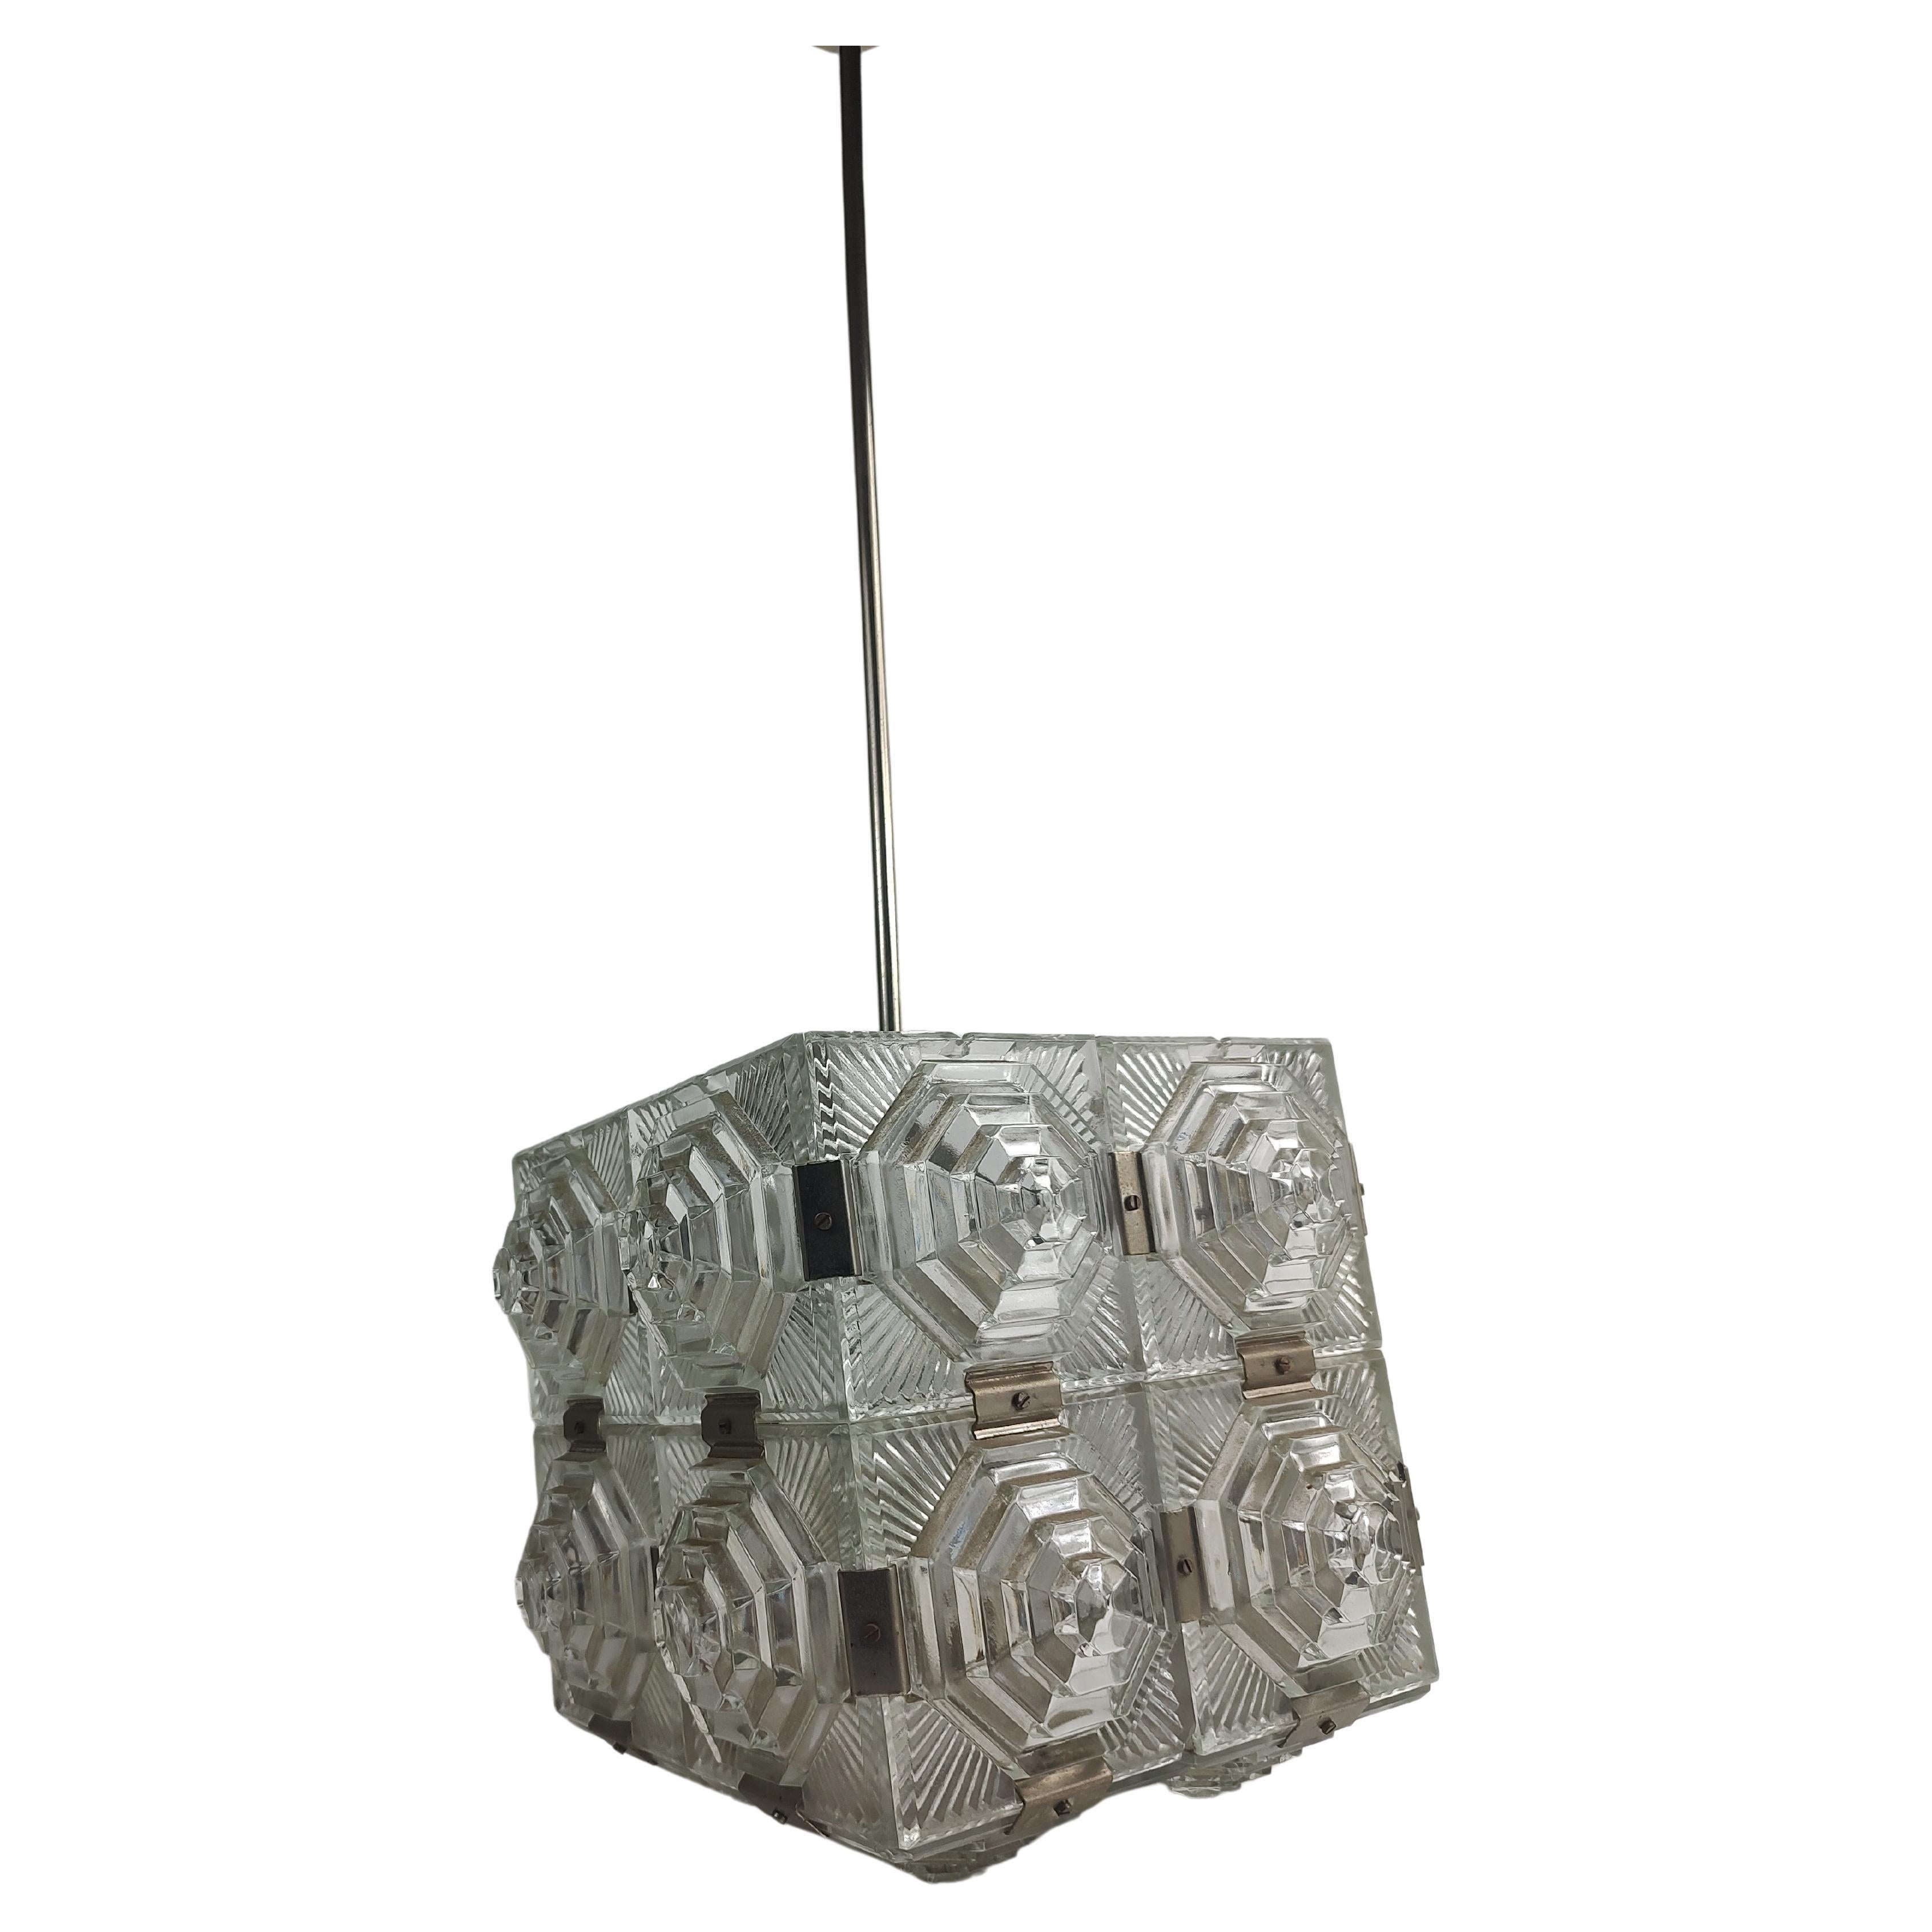 Fabulous and a rare stylized Art Deco chandelier in a cubist form. Four panels locked together create each side and bottom. Patterned on all 4 sides and the bottom this lamp creates a prism effect when lit. Nickel chrome hardware connectors lock all